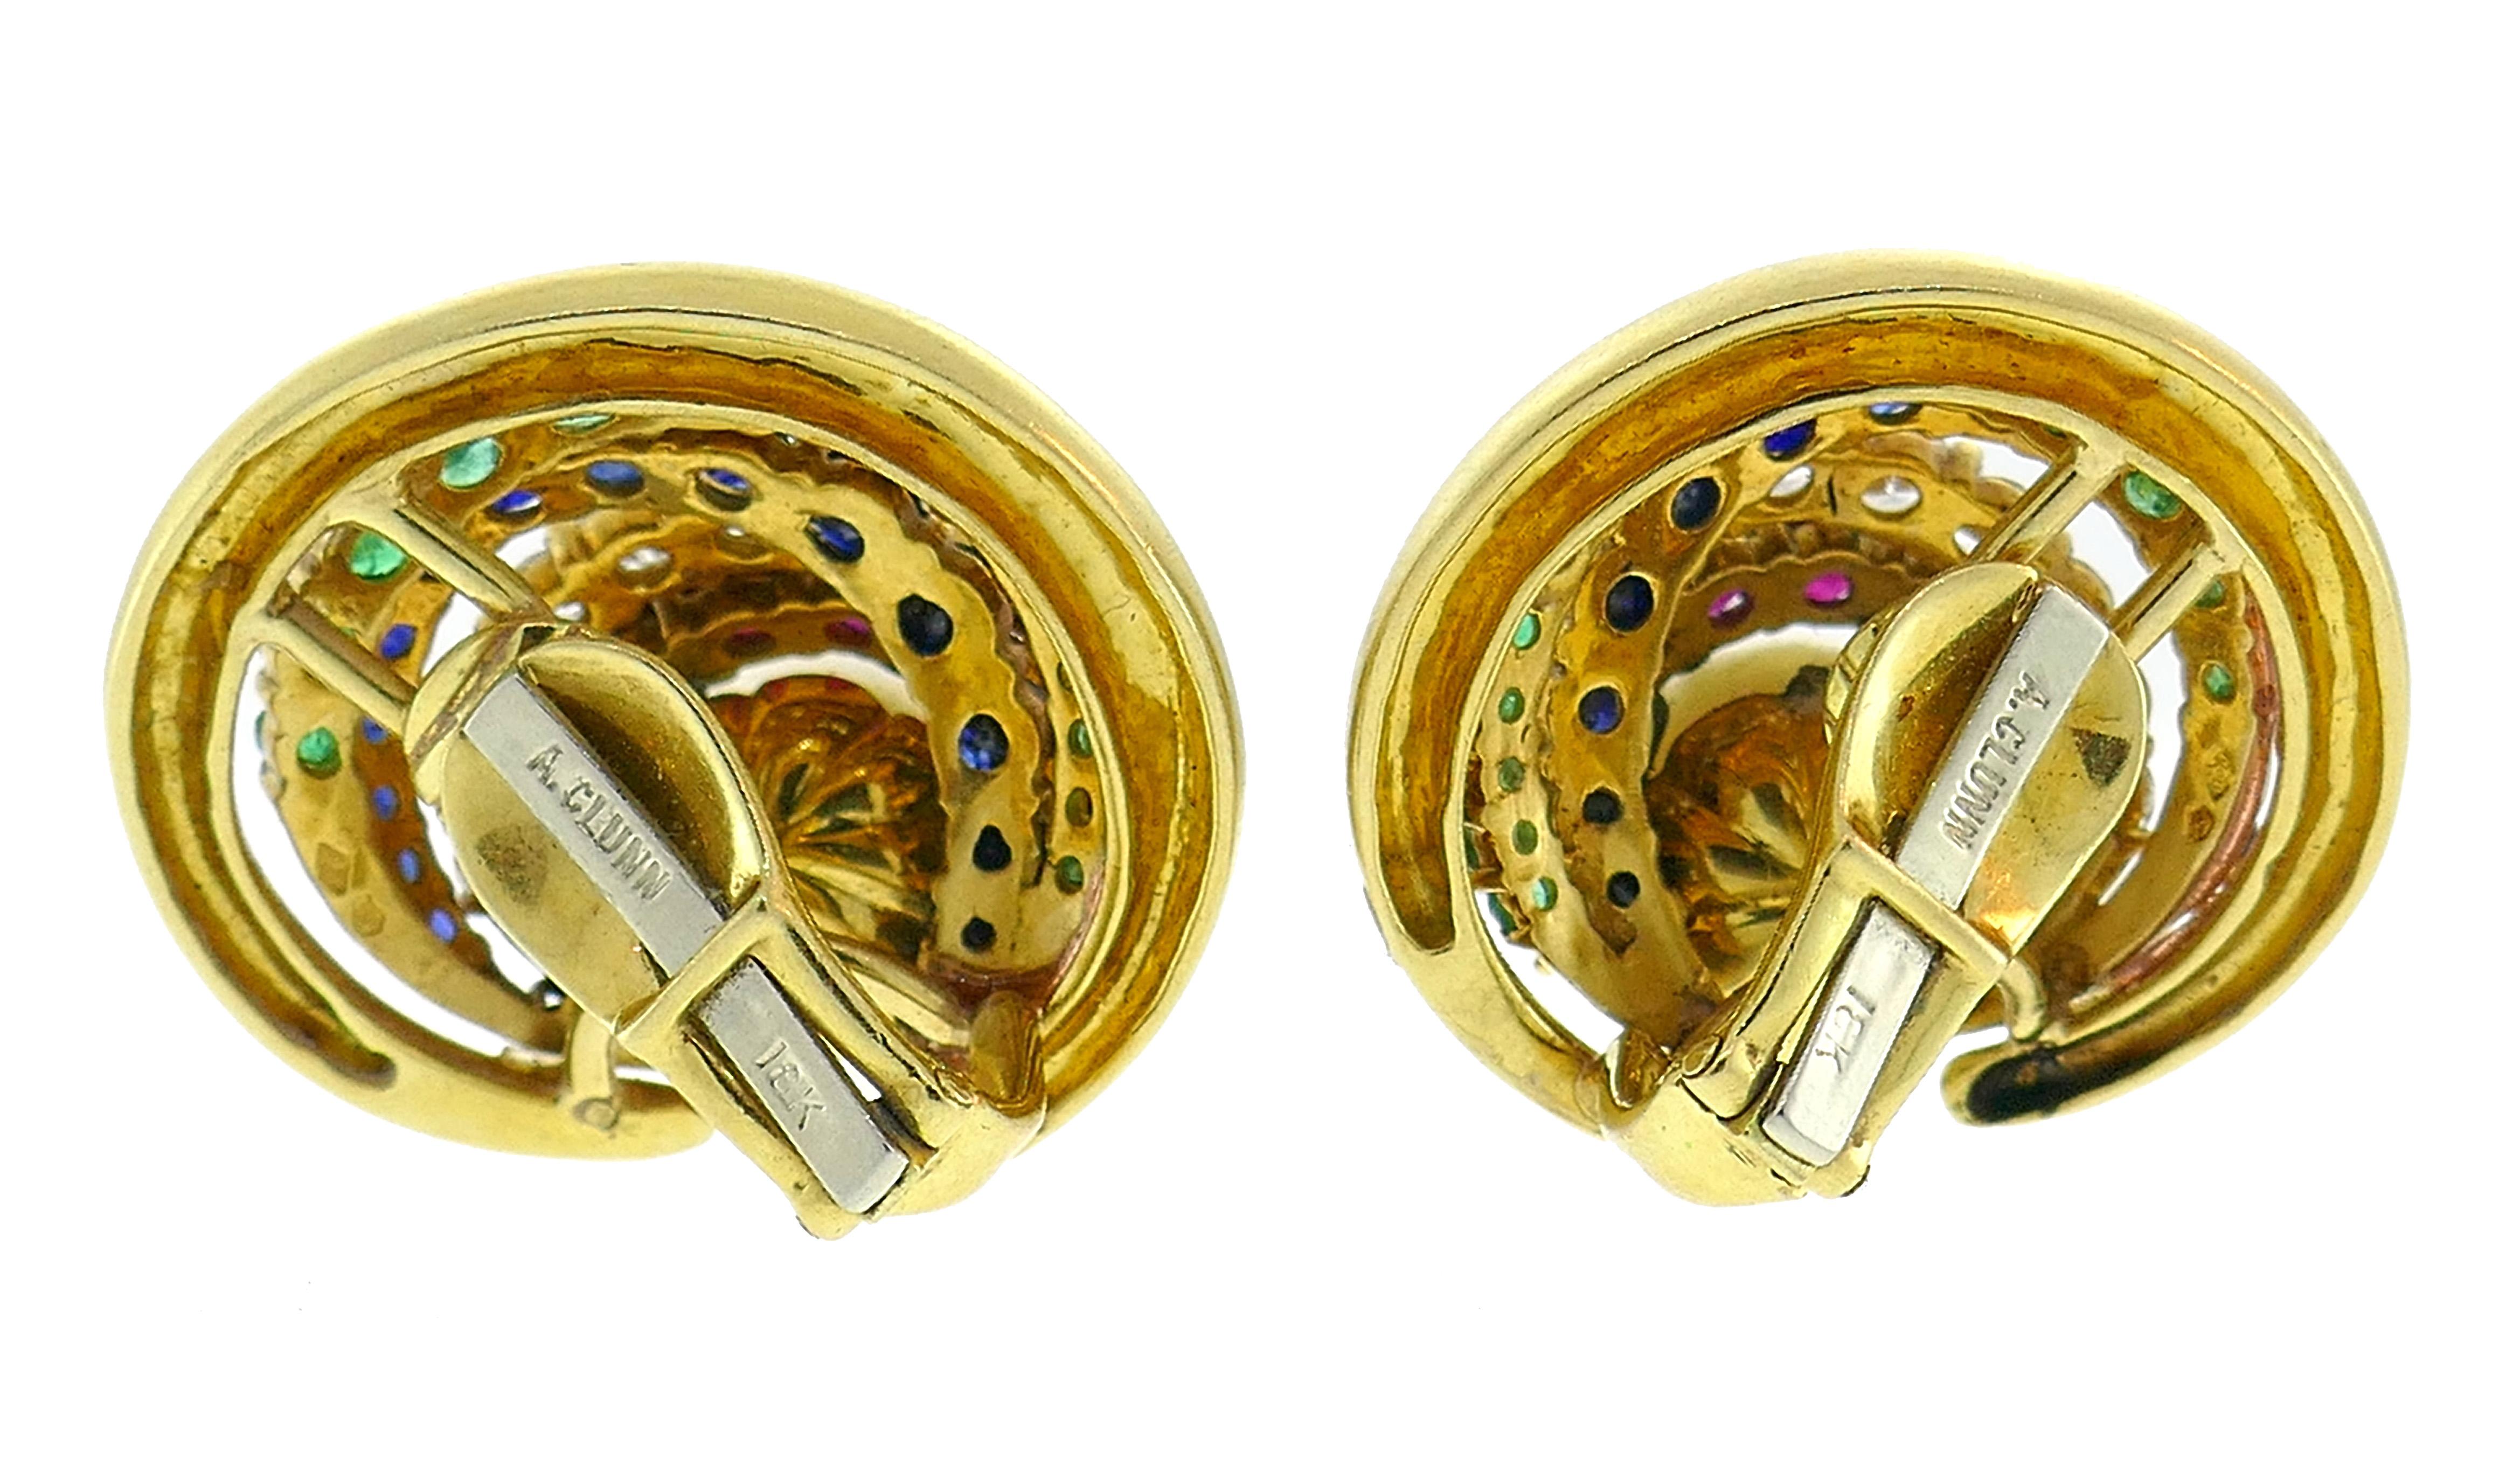 Mixed Cut Andrew Clunn Gold Earrings with Pearl Gemstones Clip-On